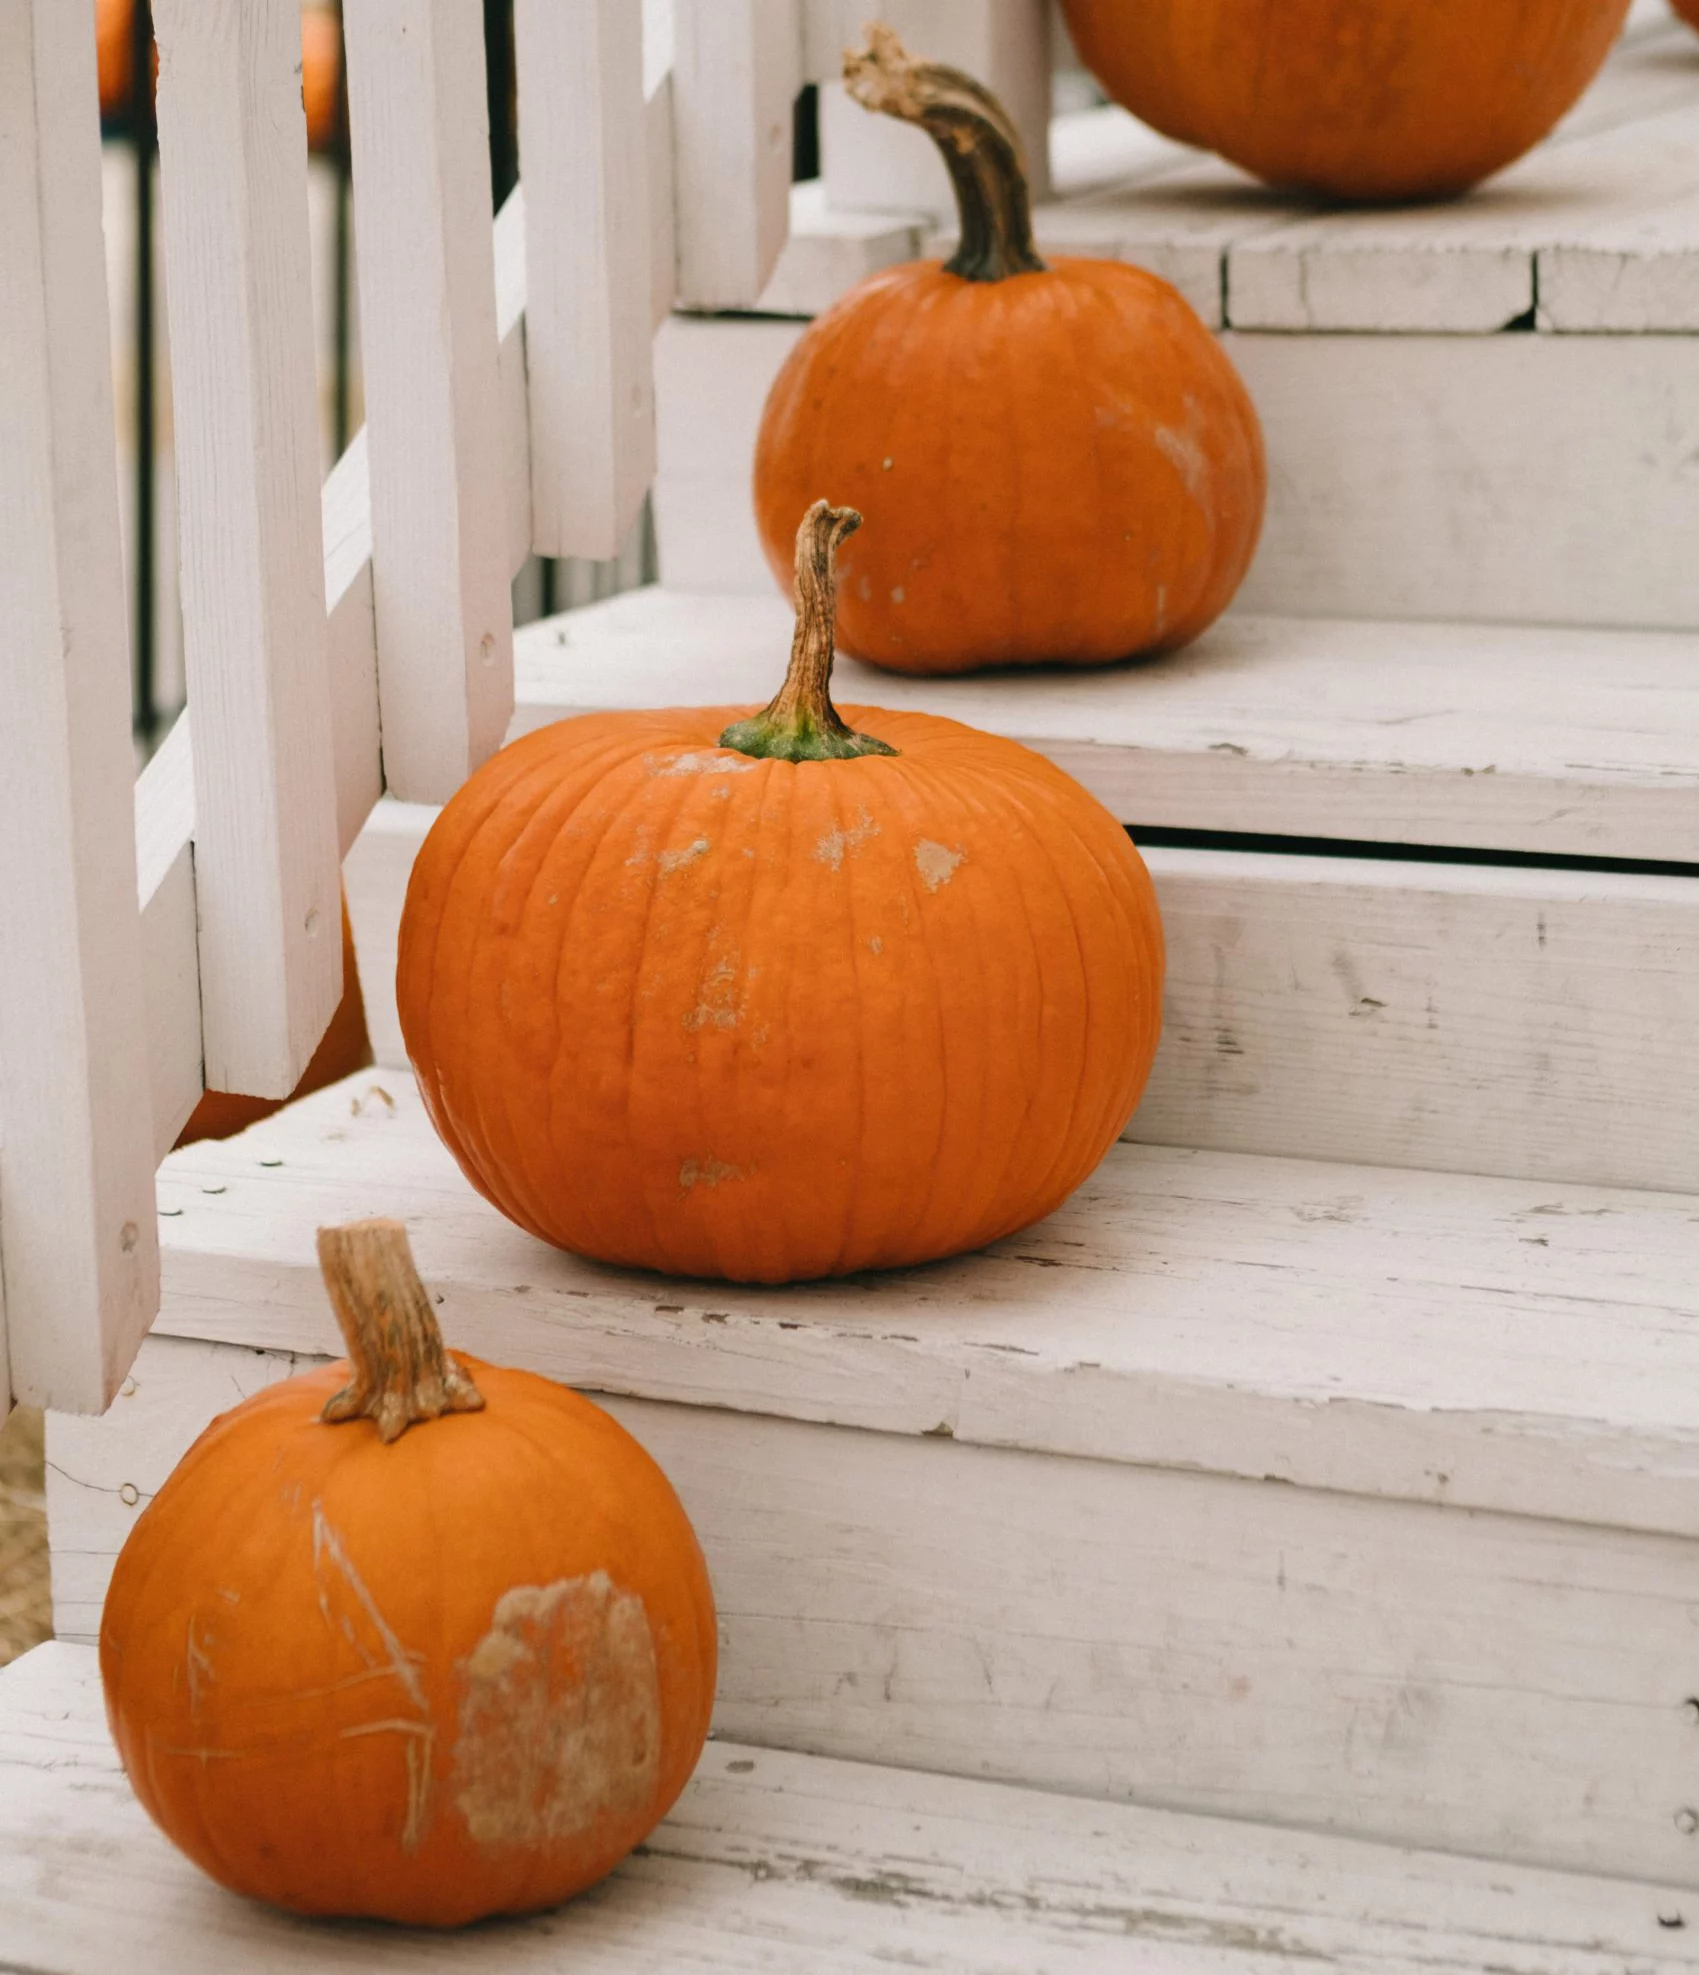 10 Things To Do On The First Day Of Fall